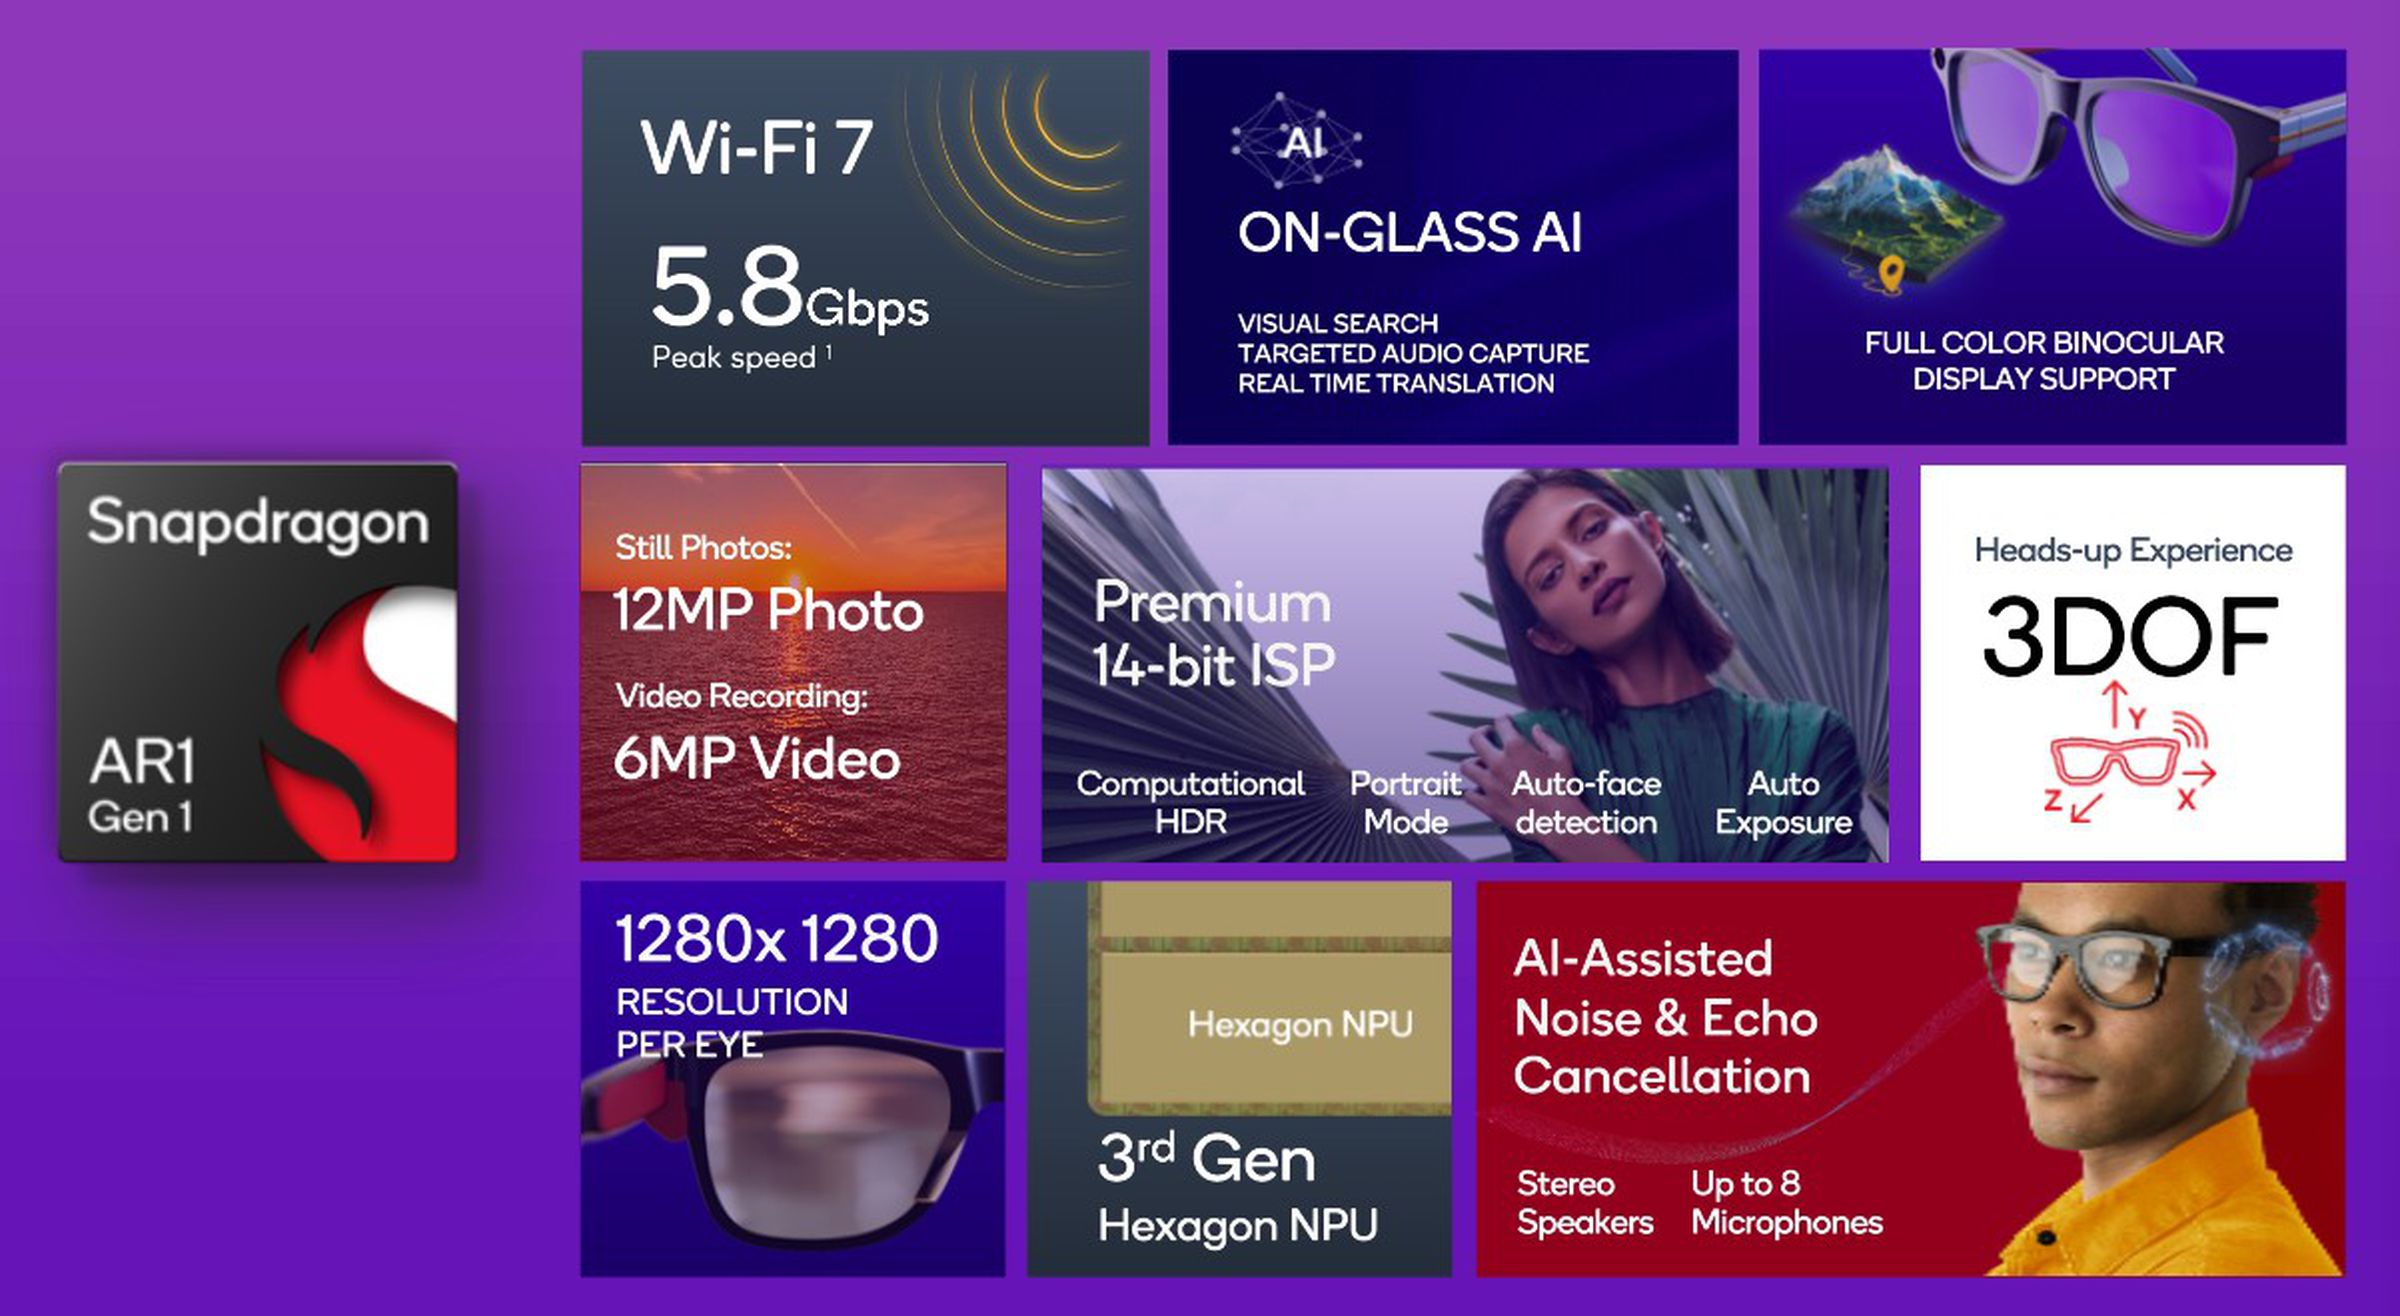 The Snapdragon AR1 Gen 1’s main features.